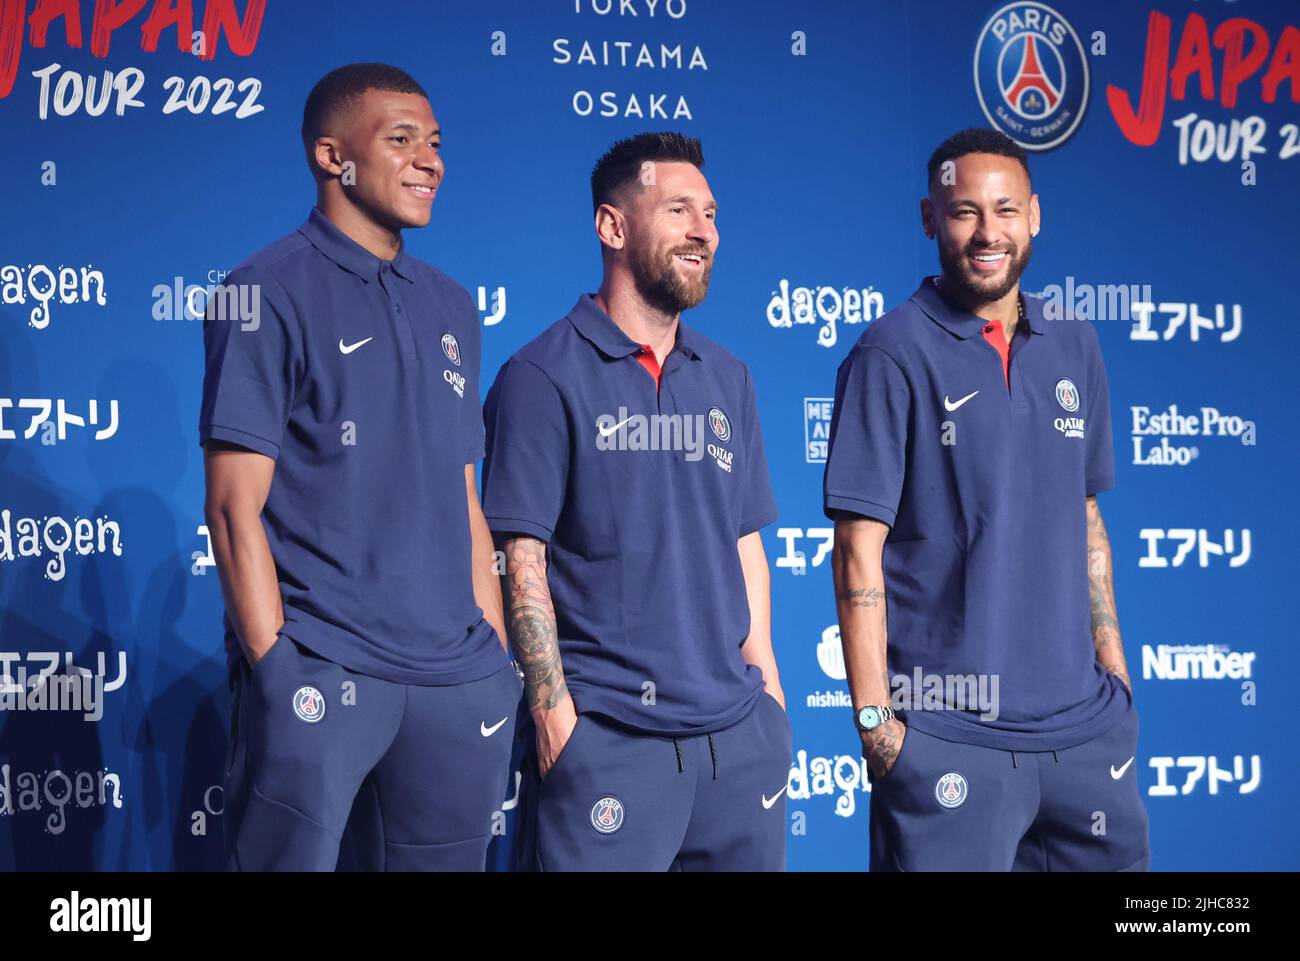 Tokyo, Japan. 17th July, 2022. (L-R) French football club team Paris Saint-Germain star players Kylian Mbappe, Lionel Messi and Neymar Jr pose for photo at a press conference upon their arrival in Tokyo on Sunday, July 17, 2022. Paris Saint-Germain will have Japanese club teams Kawasaki Frontale, Urawa Reds and Gamba Osaka for their Japan tour. Credit: Yoshio Tsunoda/AFLO/Alamy Live News Stock Photo